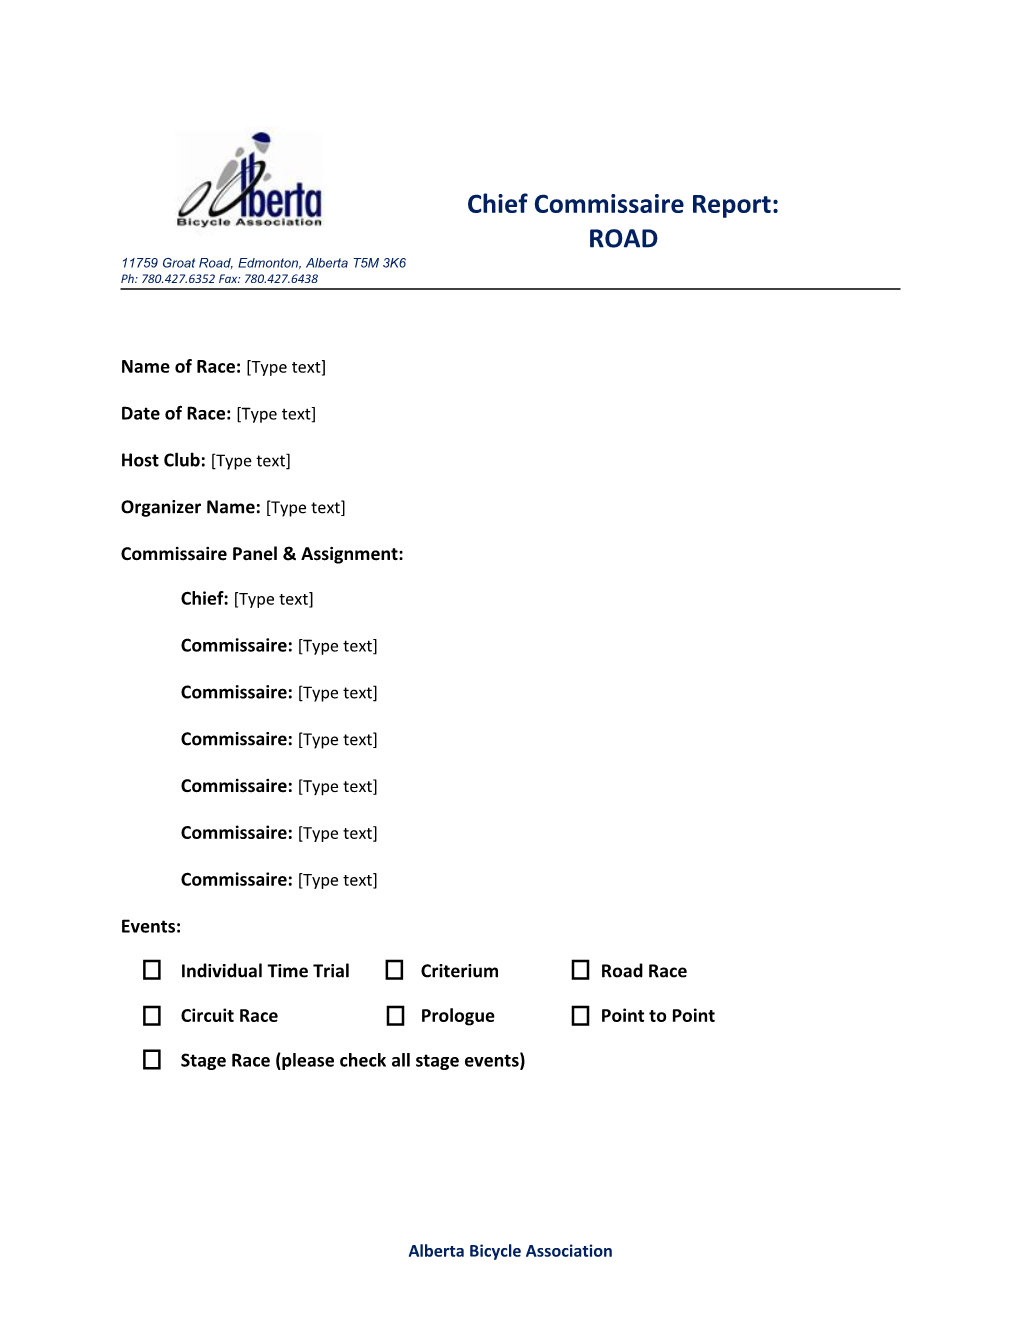 Chief Commissaire Report